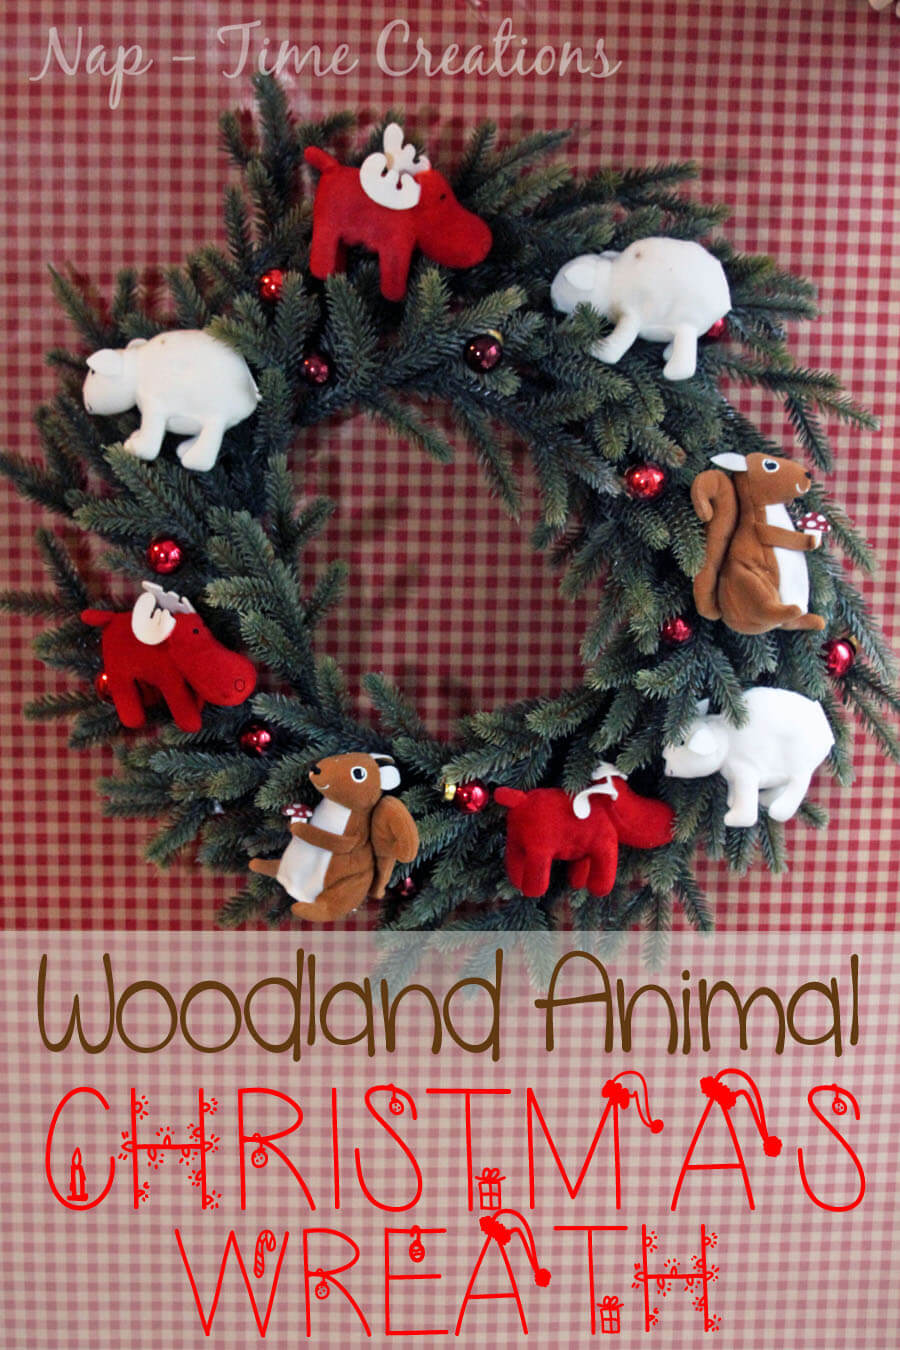 Woodland Animal Christmas Wreath by Nap-Time Creations